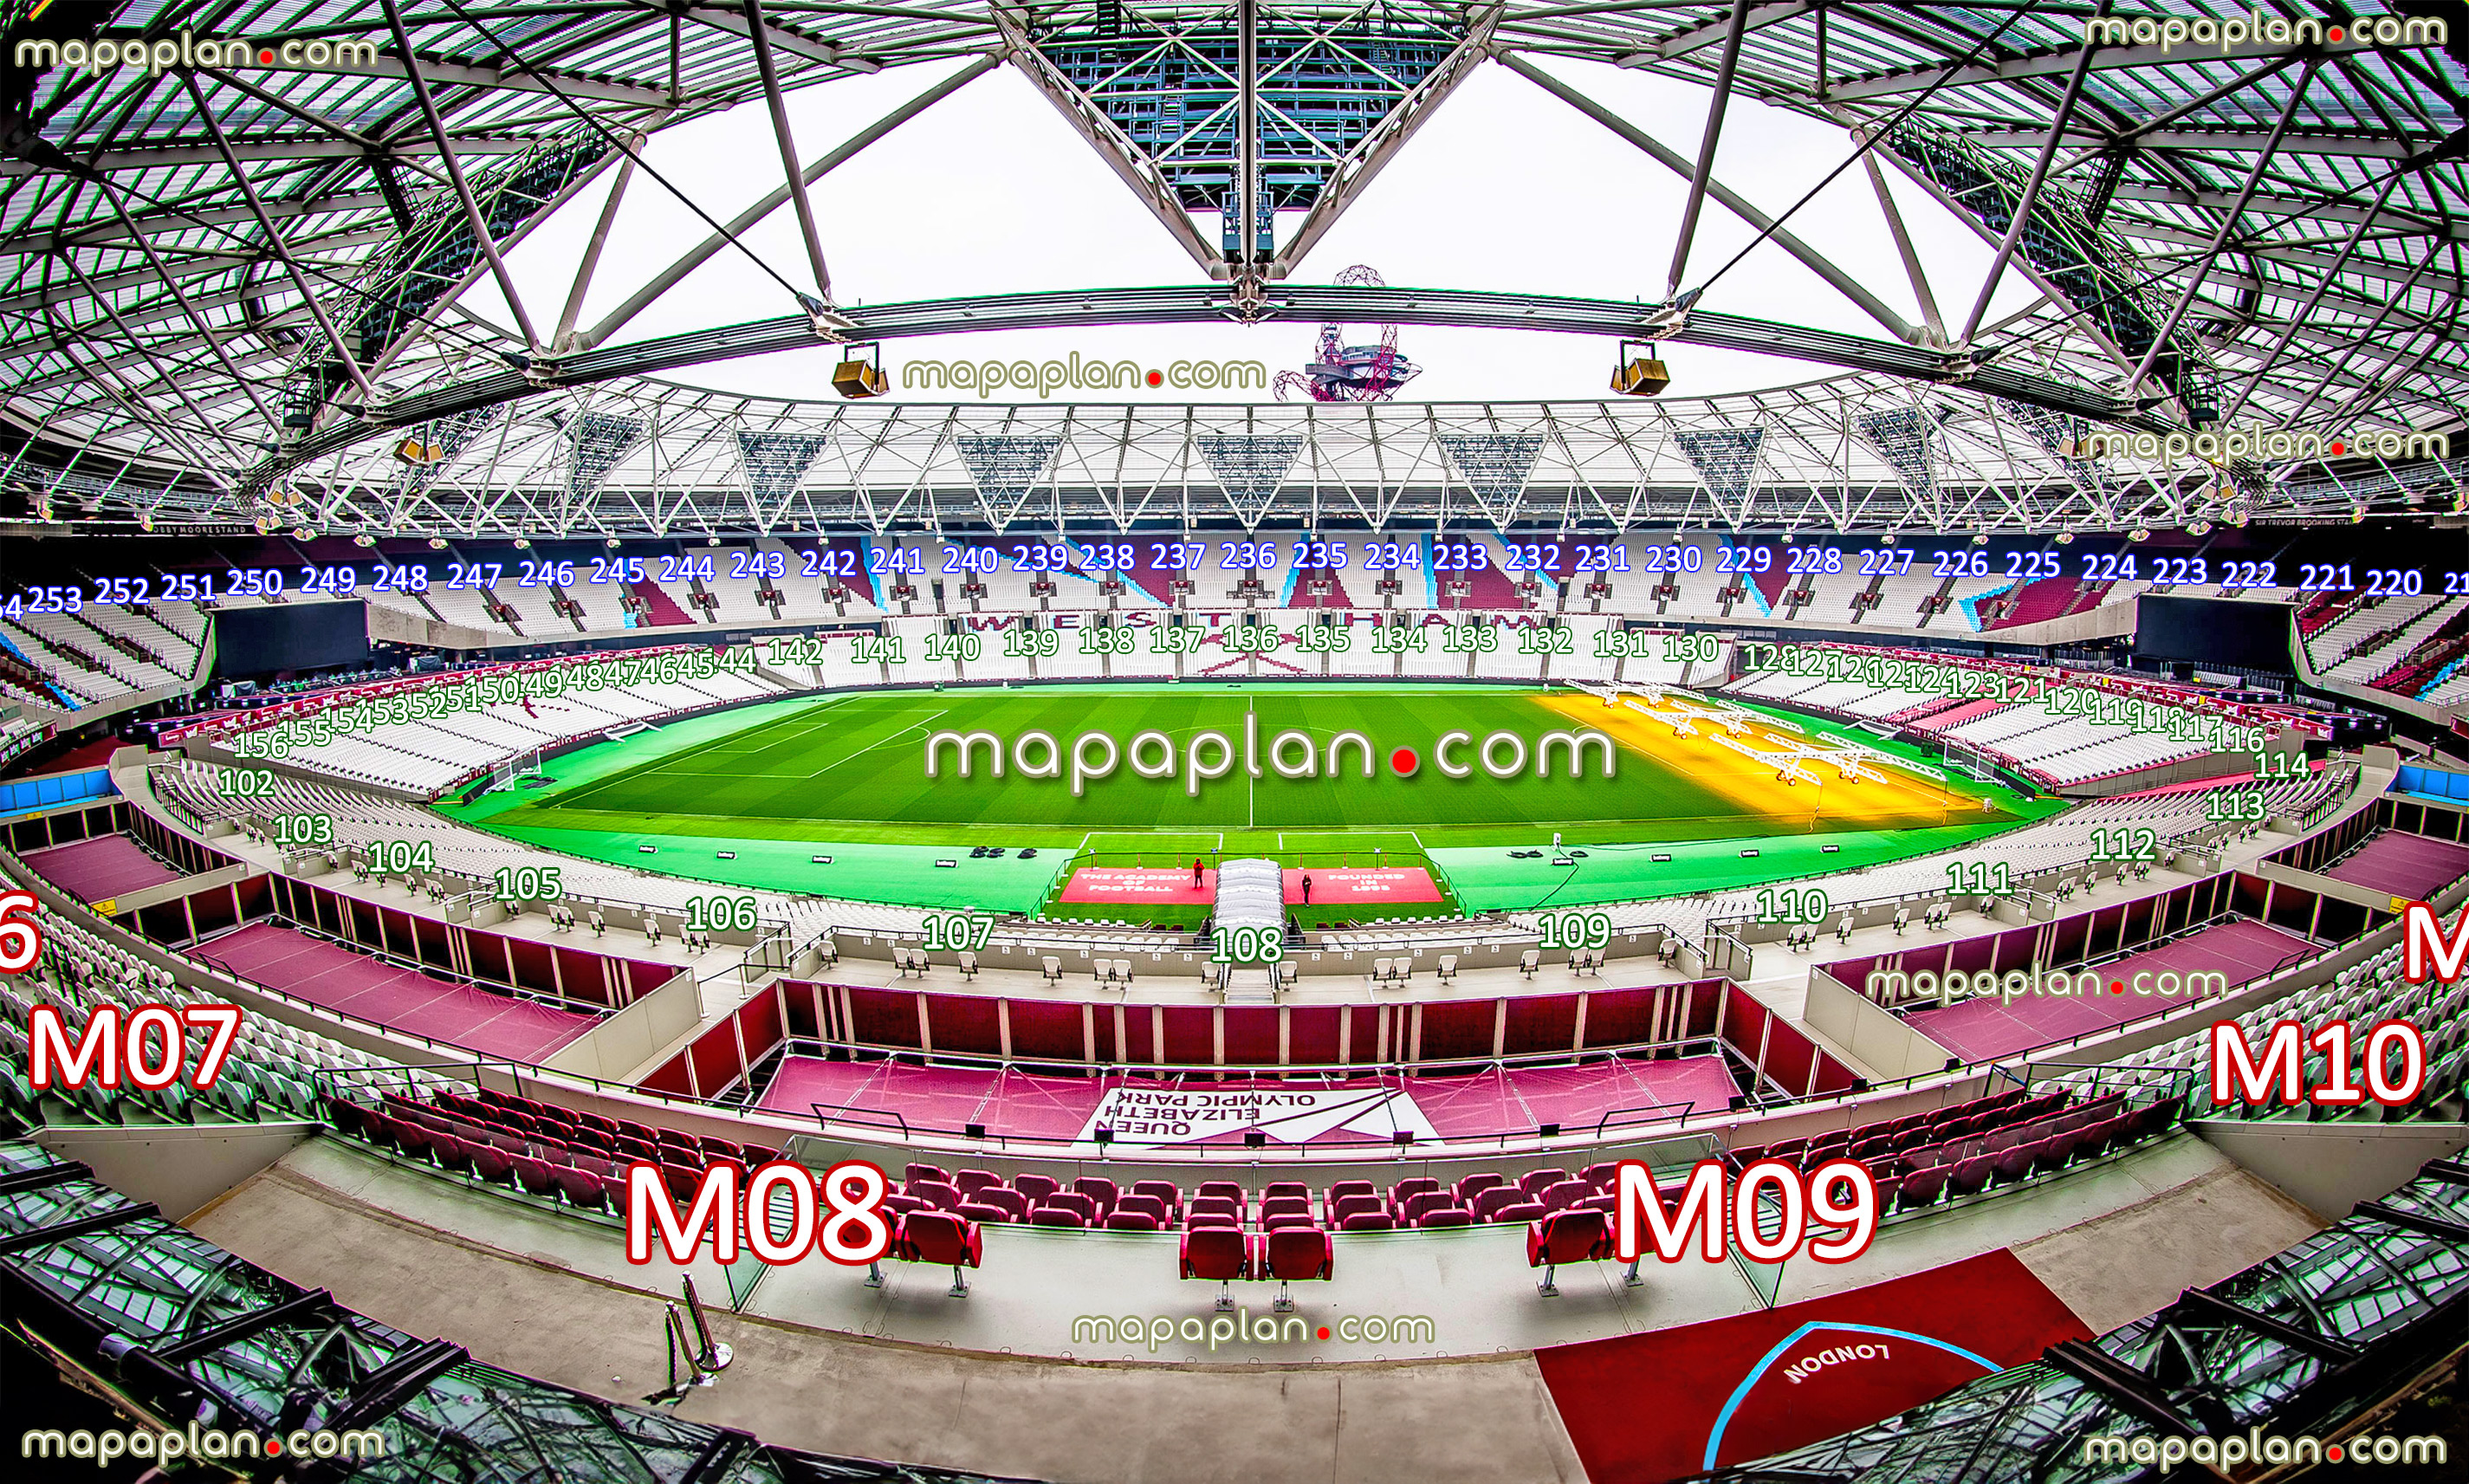 London Stadium (West Ham United Olympic Park) virtual seating chart view from block 208 row 54 seat 420 west ham united football match seating capacity 360 aerial inside view arrangement plan interactive virtual 3d seats rows detailed stadium image layout club london boxes